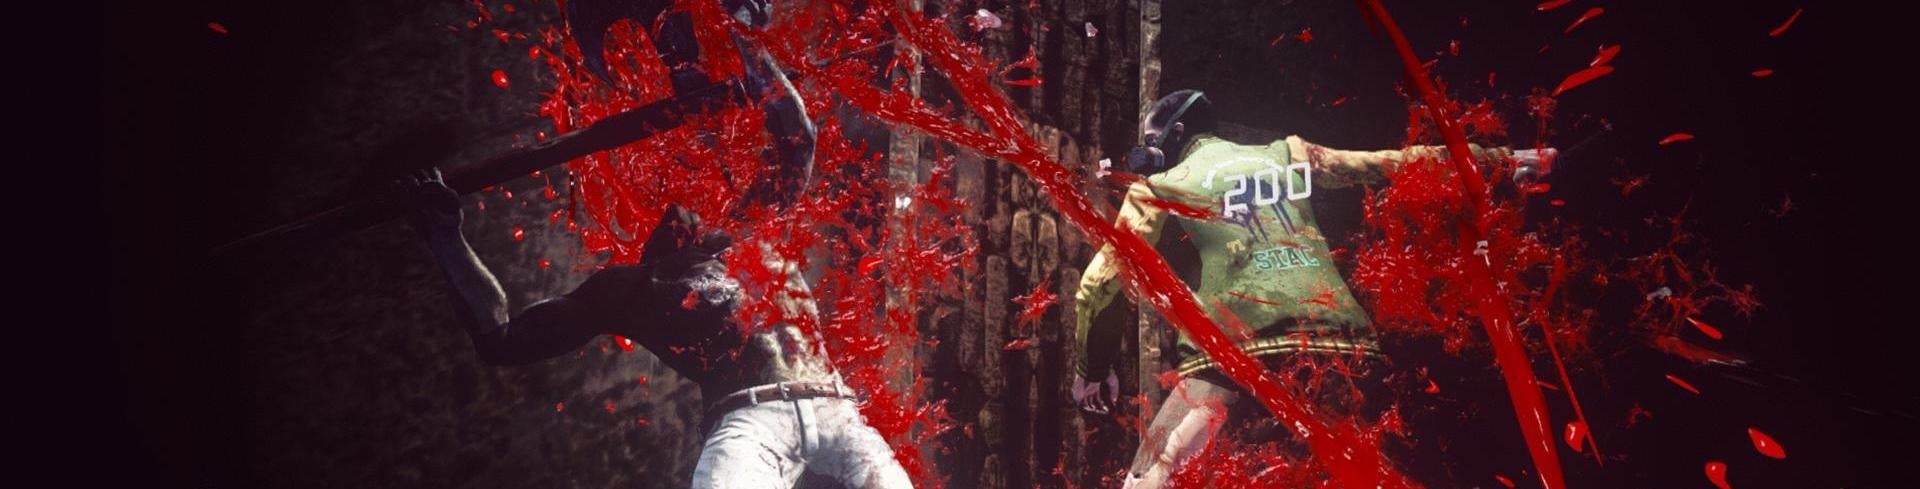 Image for Let it Die is Grasshopper's refreshingly different return to form